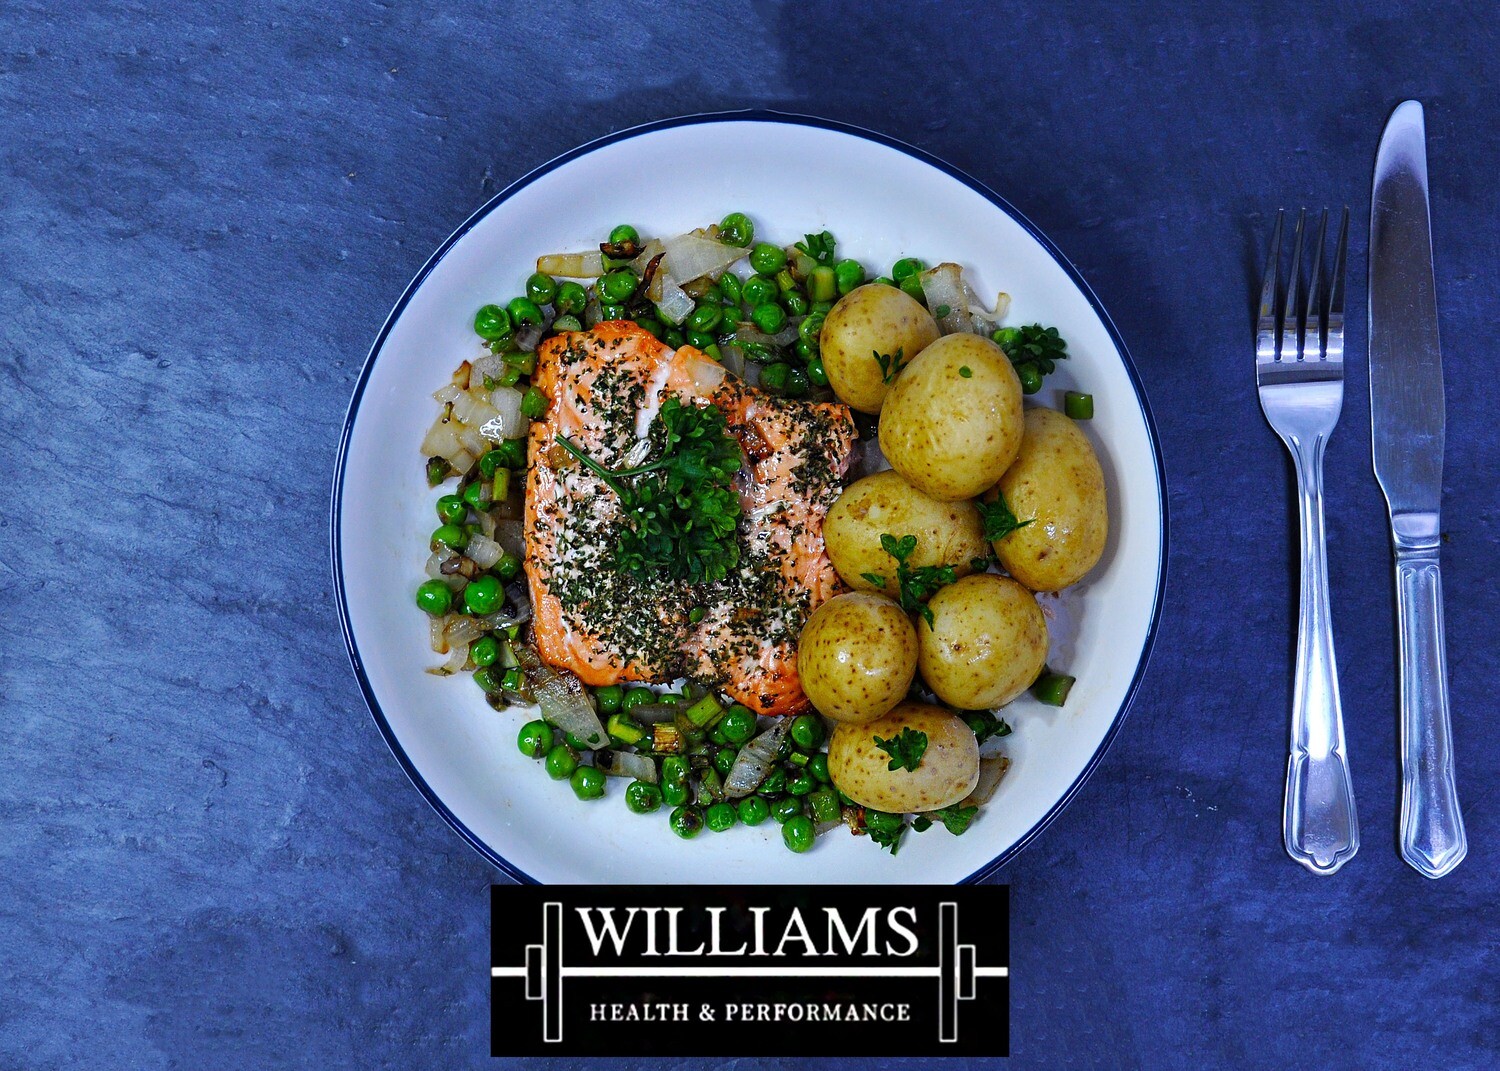 Tom Williams Oven Baked Salmon